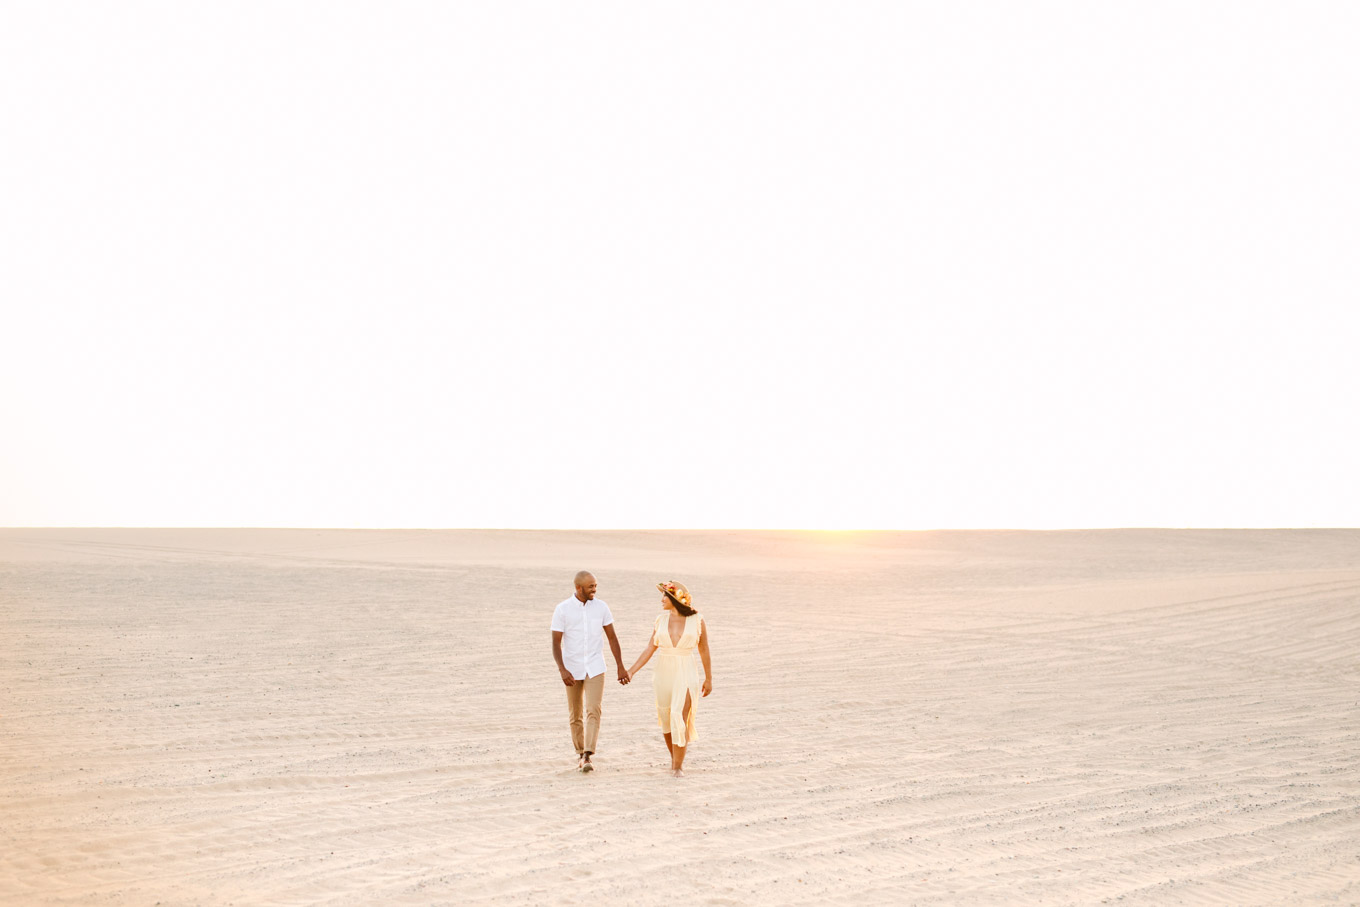 Engaged couple walking along a sand dune at sunset | California Sand Dunes engagement session | Colorful Palm Springs wedding photography | #palmspringsphotographer #sanddunes #engagementsession #southerncalifornia  Source: Mary Costa Photography | Los Angeles